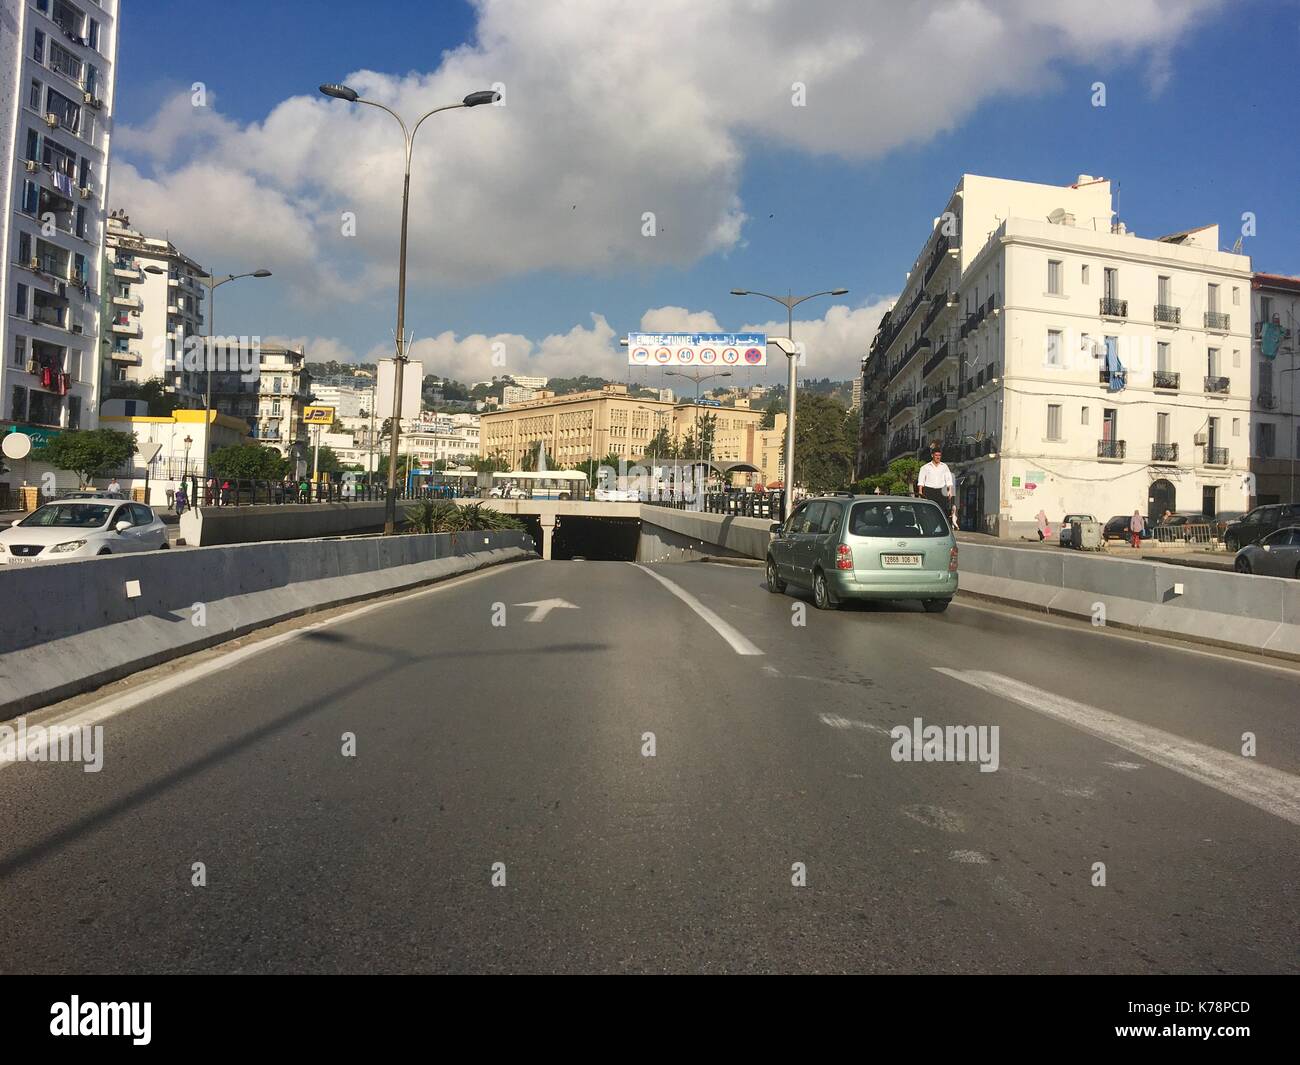 ALGIERS, ALGERIA - SEP 12, 2017: French colonial side of the city of Algiers Algeria.Modern city has many old French type buildings. Stock Photo